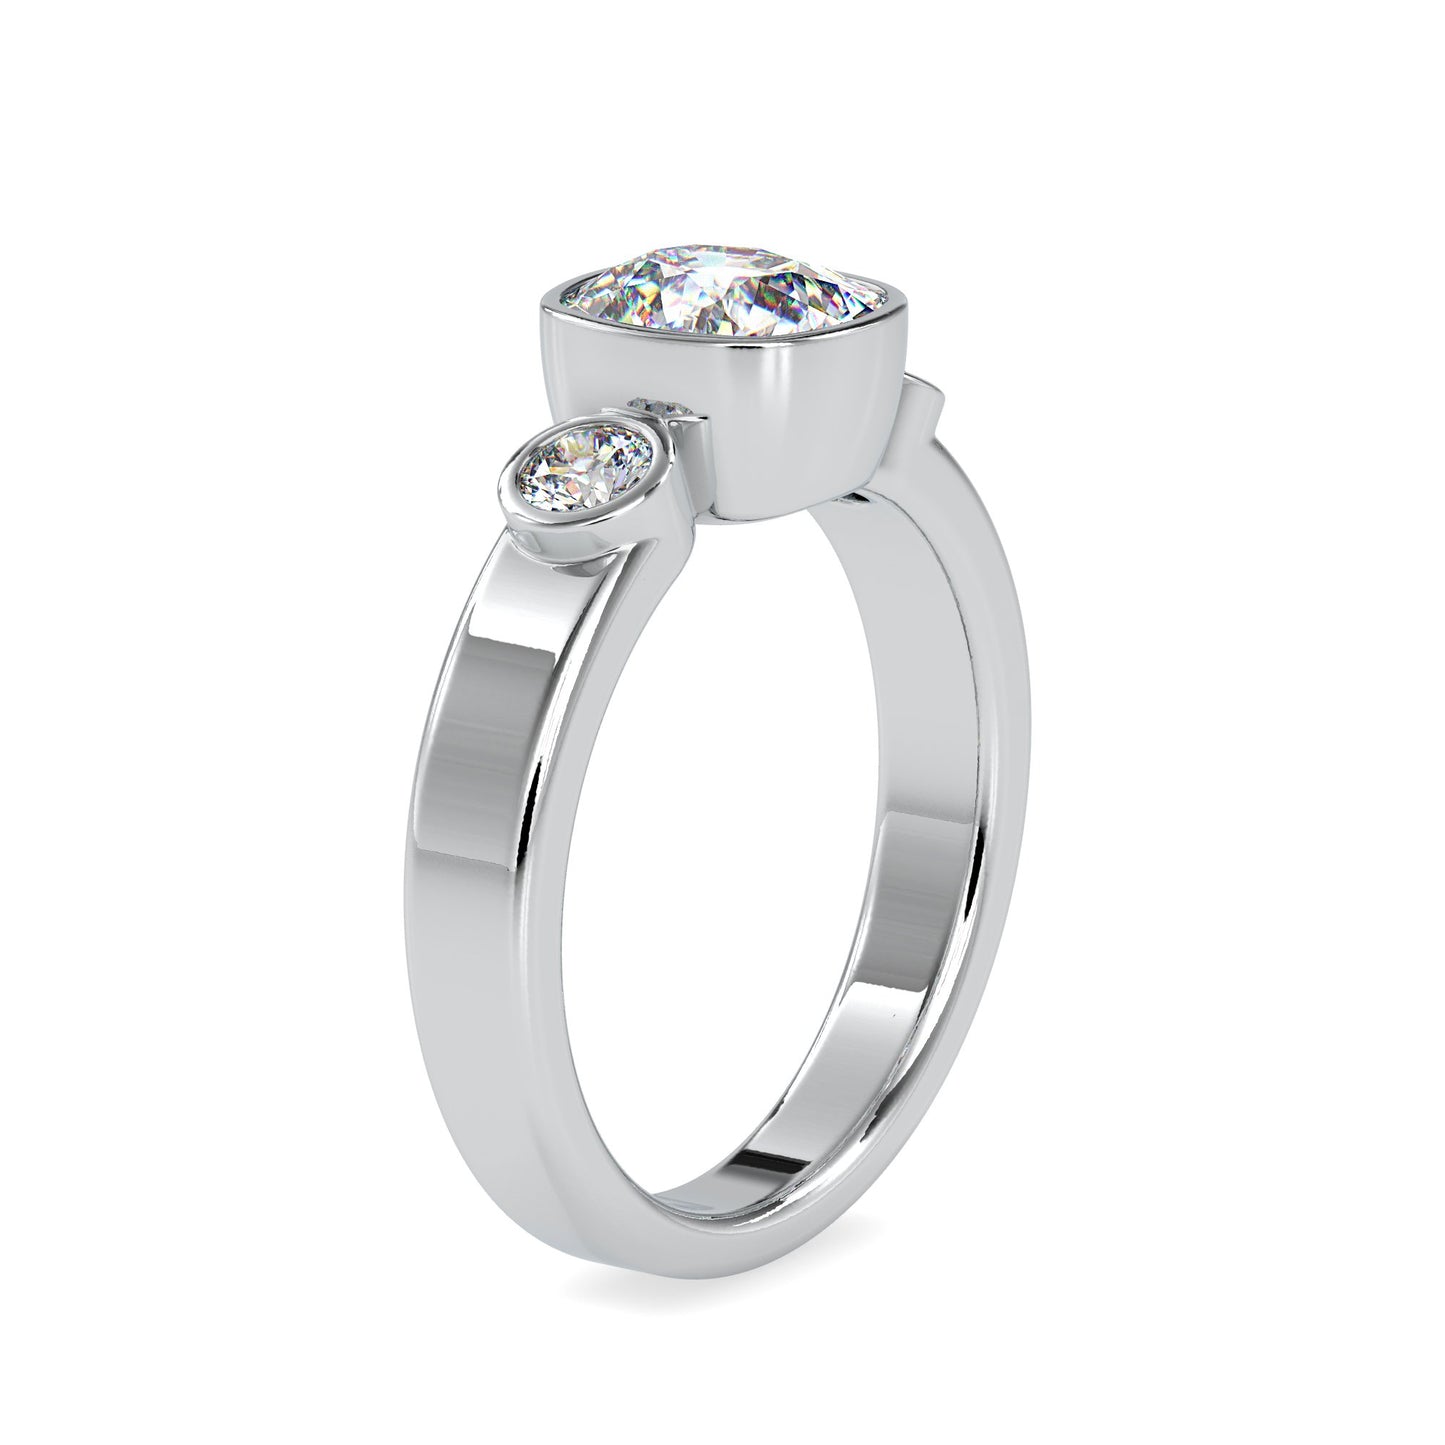 The Nona Sterling Silver and Moissanite Threestone Ring